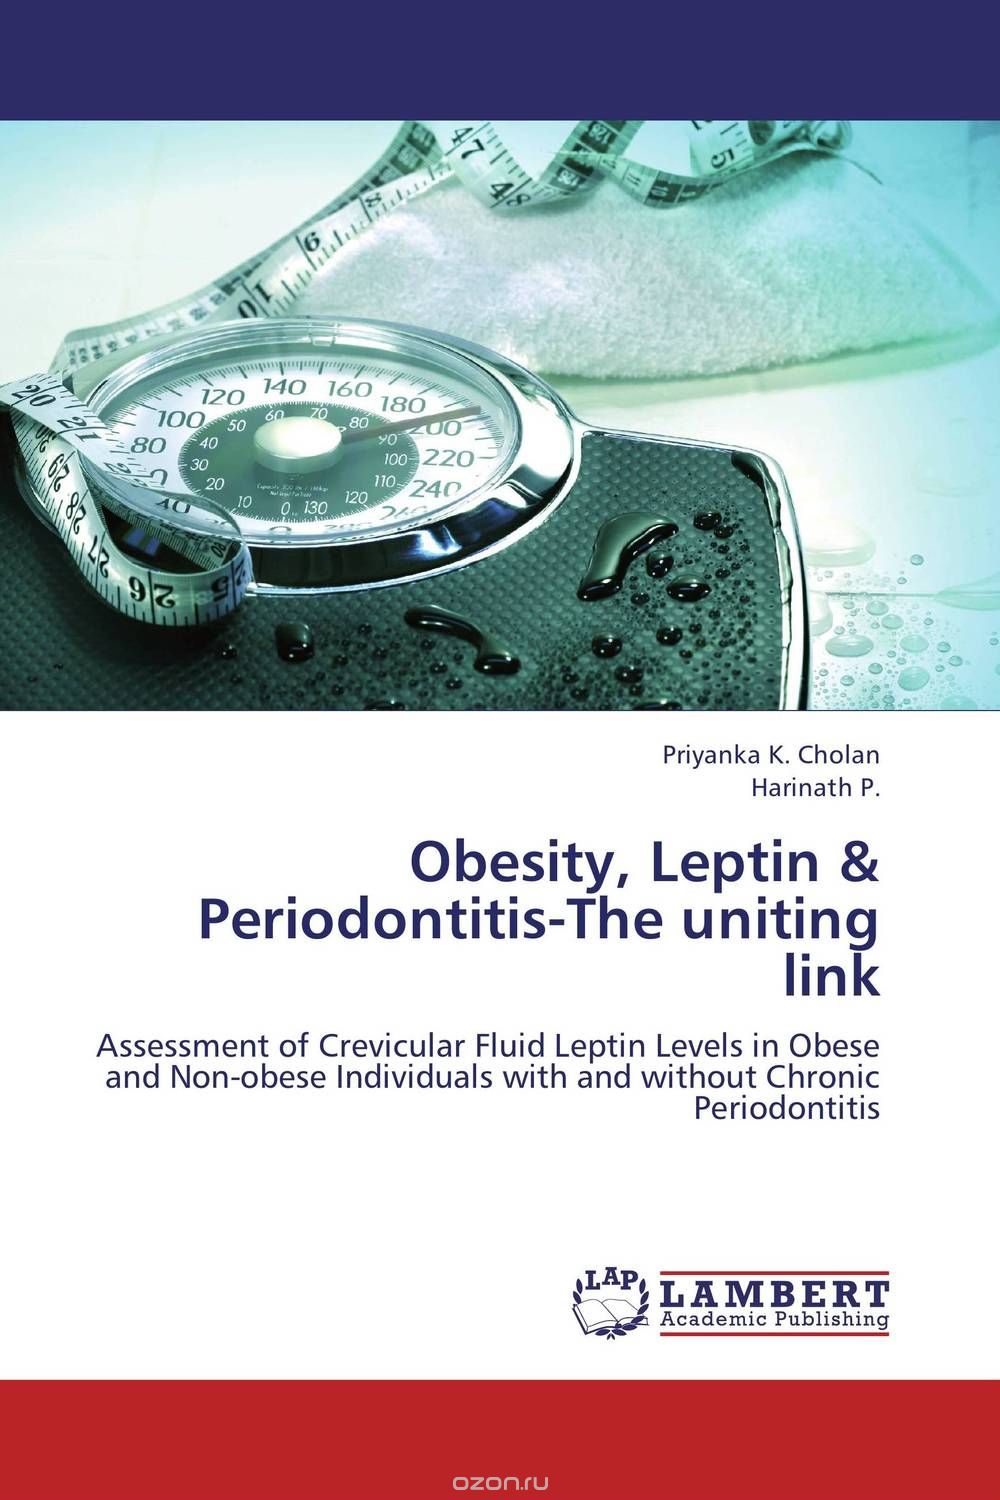 Obesity, Leptin & Periodontitis-The uniting link